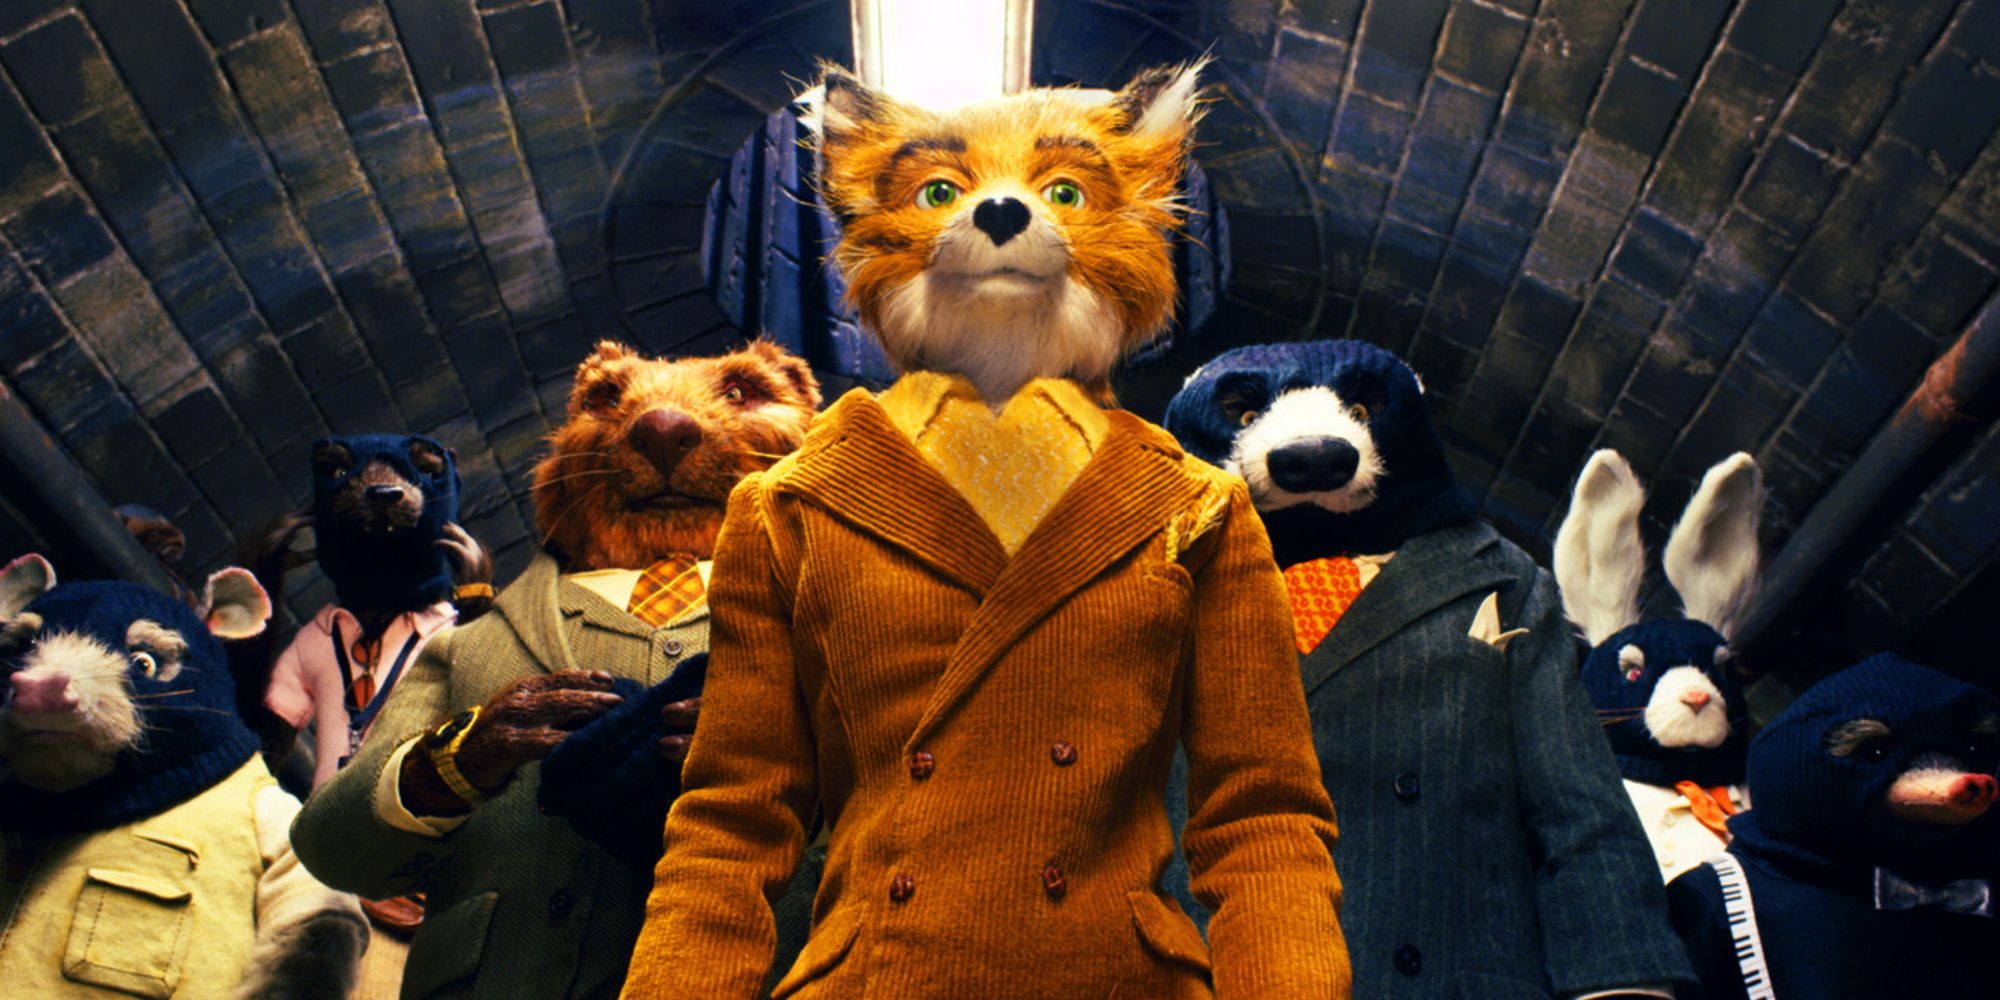 Mr Fox and the critters